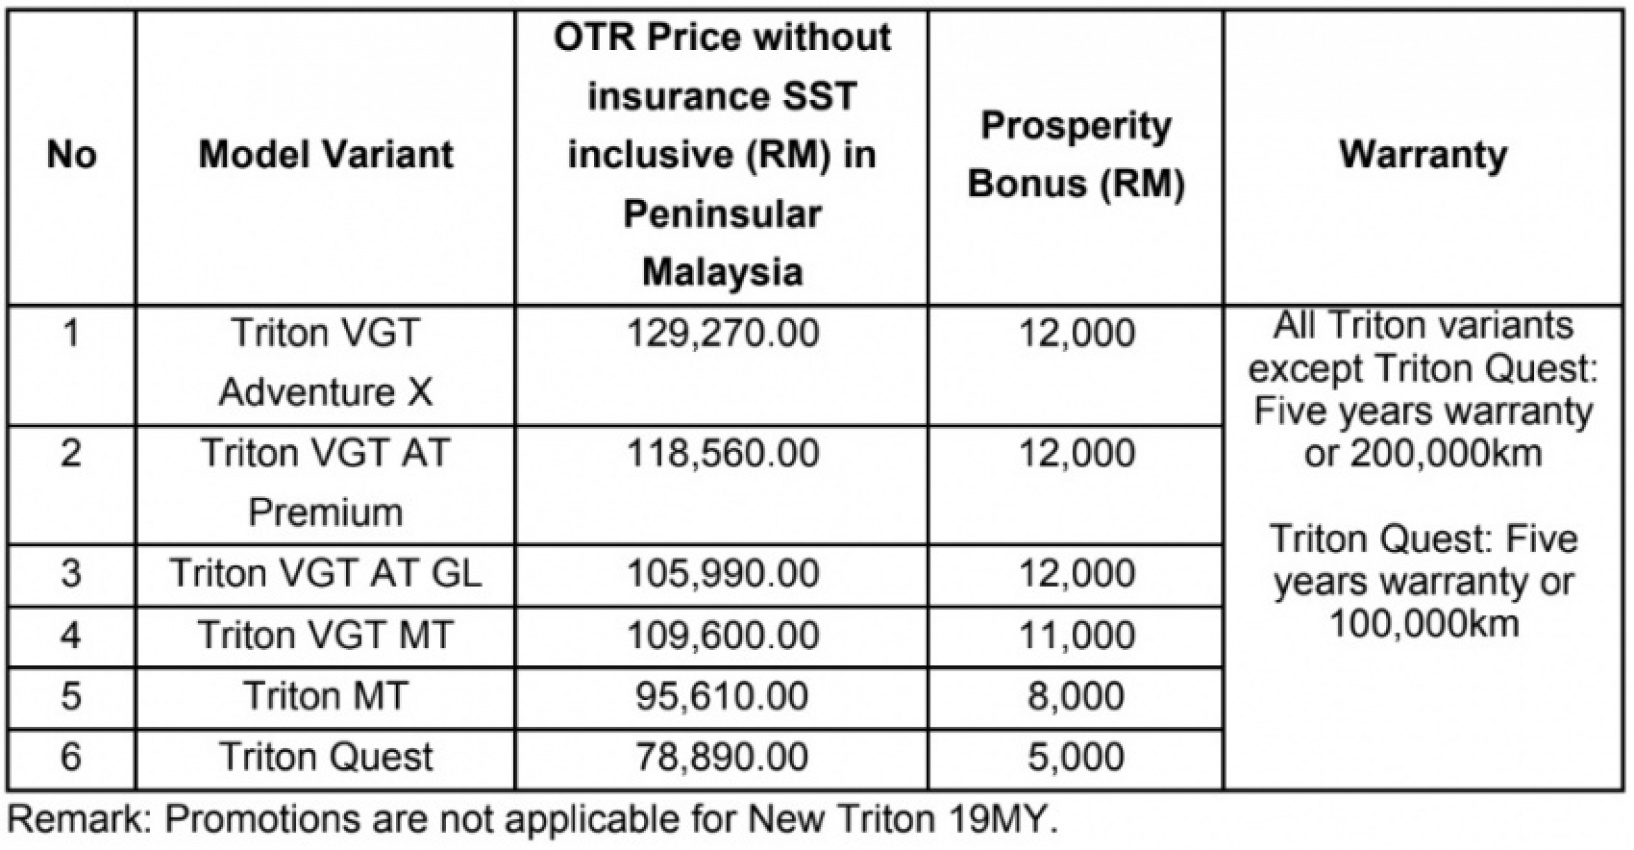 autos, car brands, cars, mitsubishi, chinese new year, malaysia, mitsubishi motors, mitsubishi motors malaysia, pick up truck, promotions, mitsubishi motors malaysia offers some prosperity bonus for chinese new year